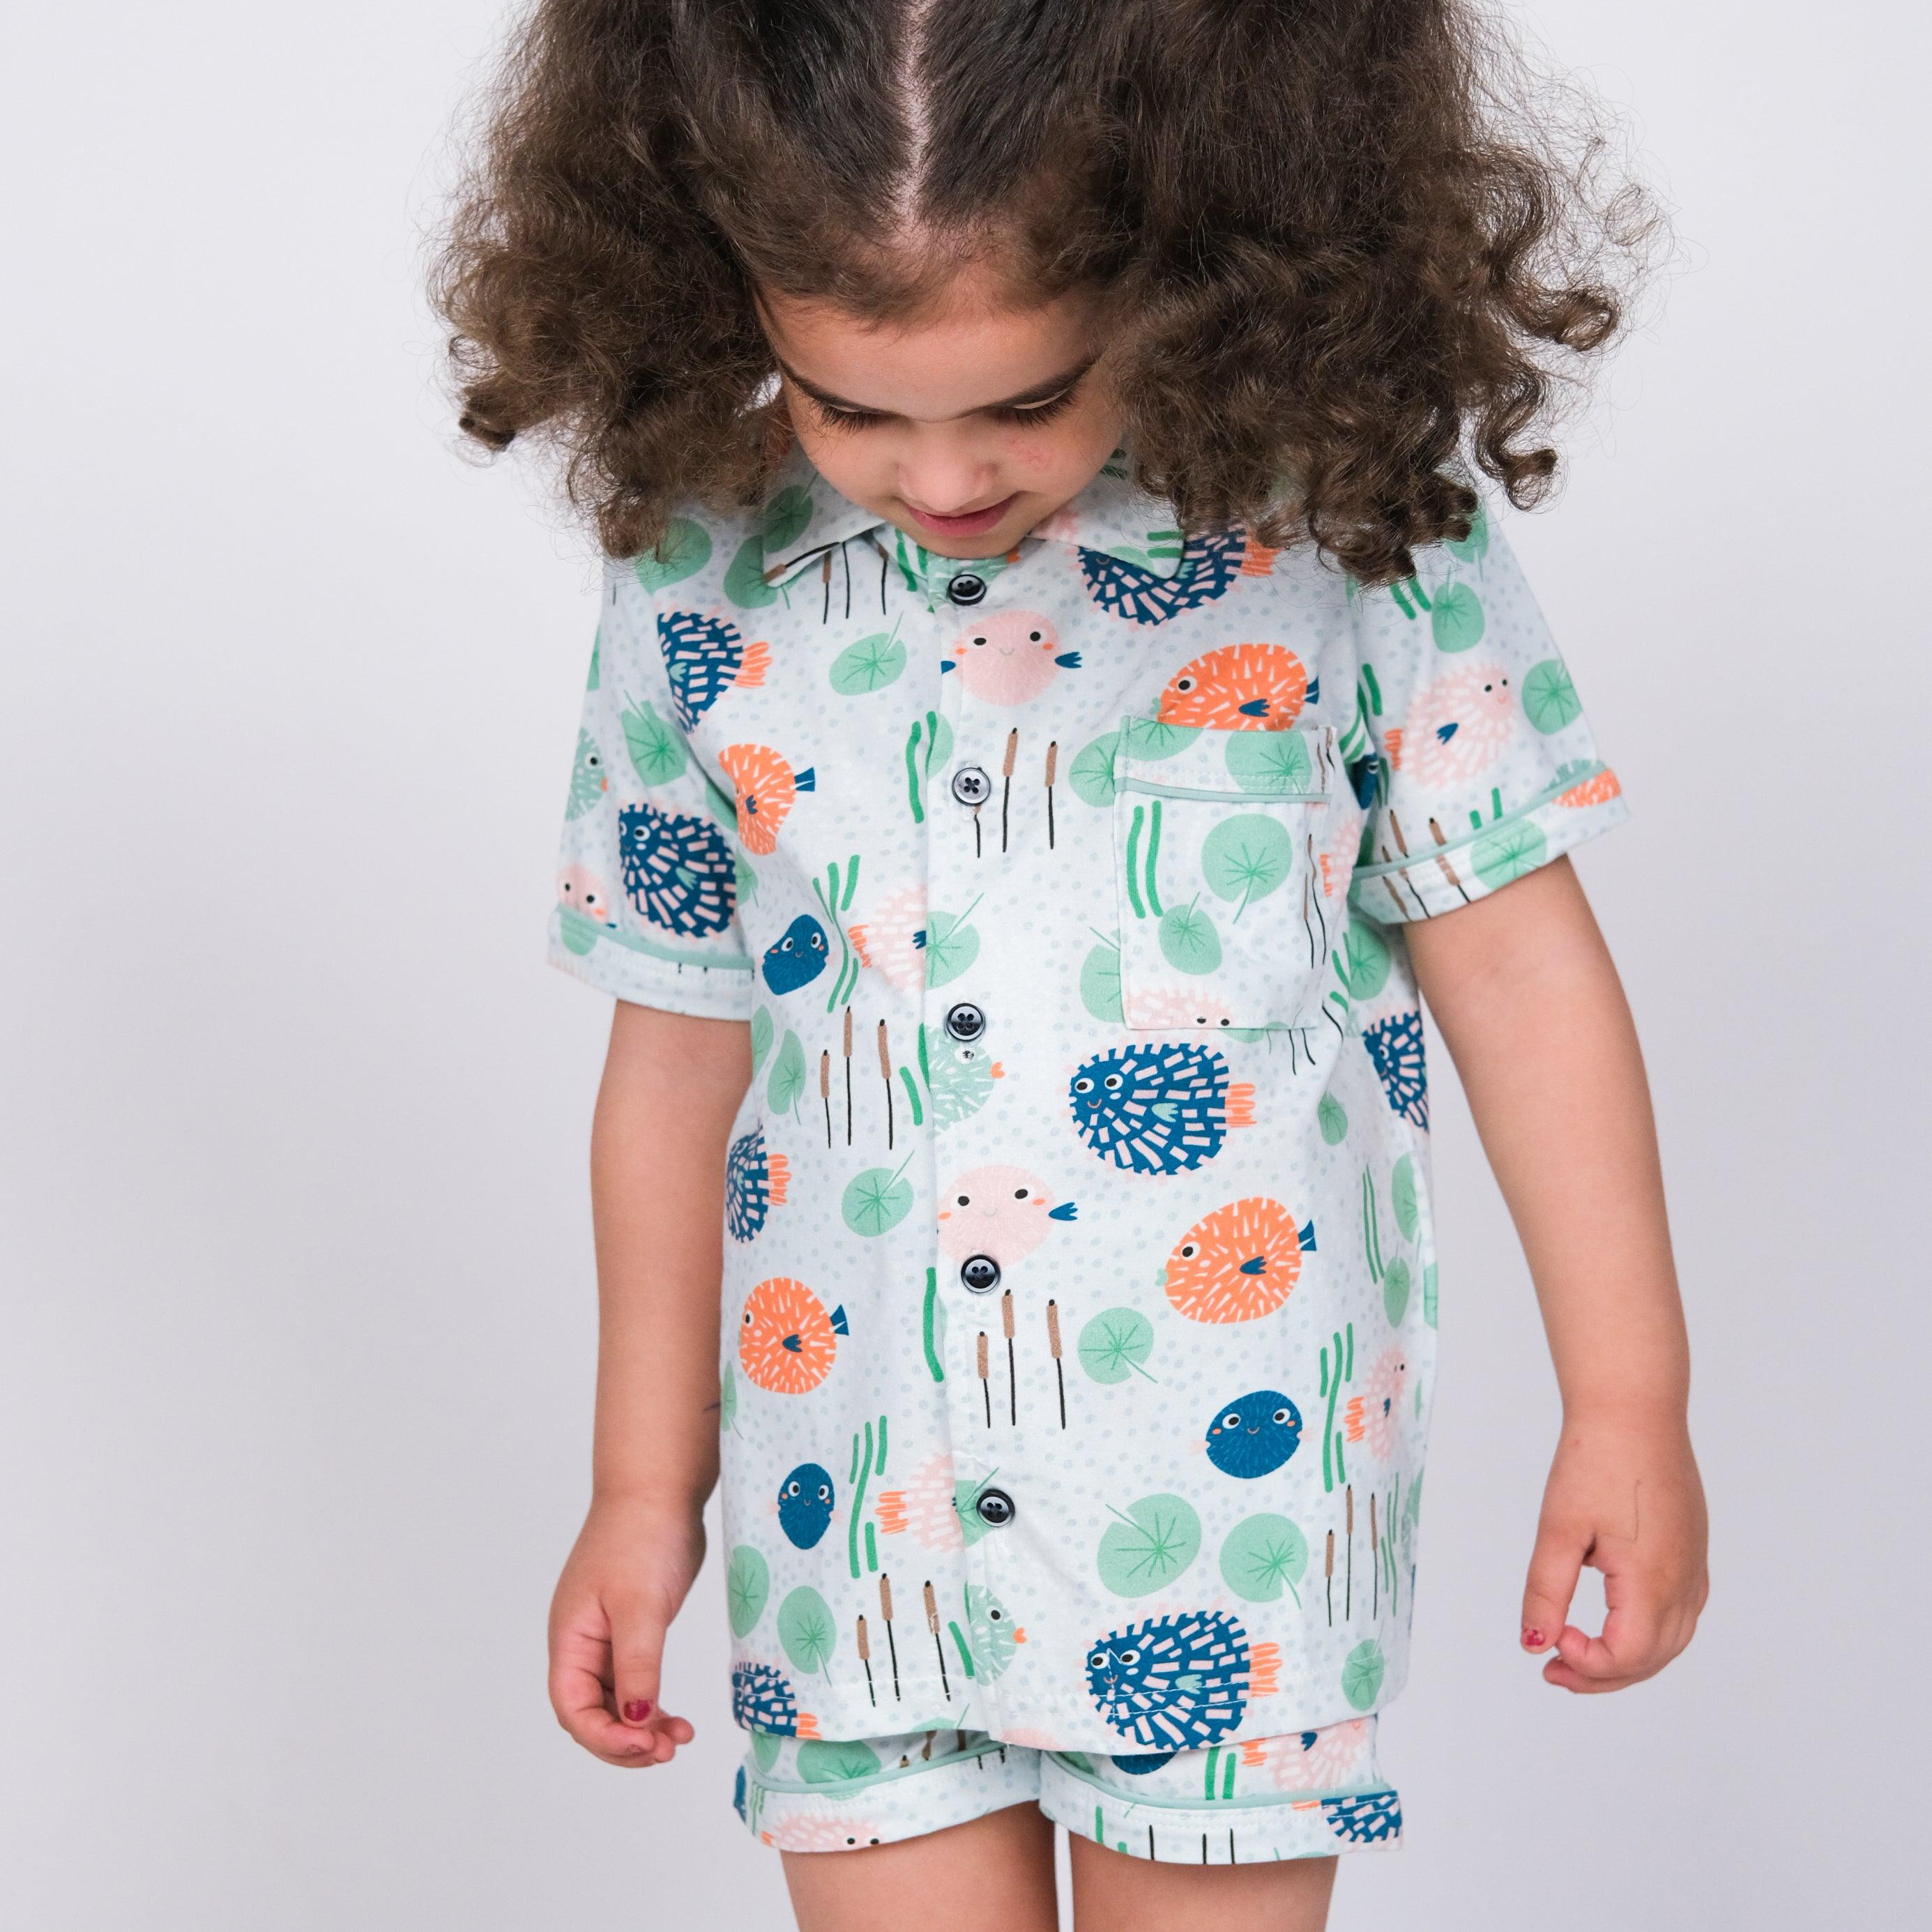 Short-Sleeved Pajama - Ourkids - Ourkids